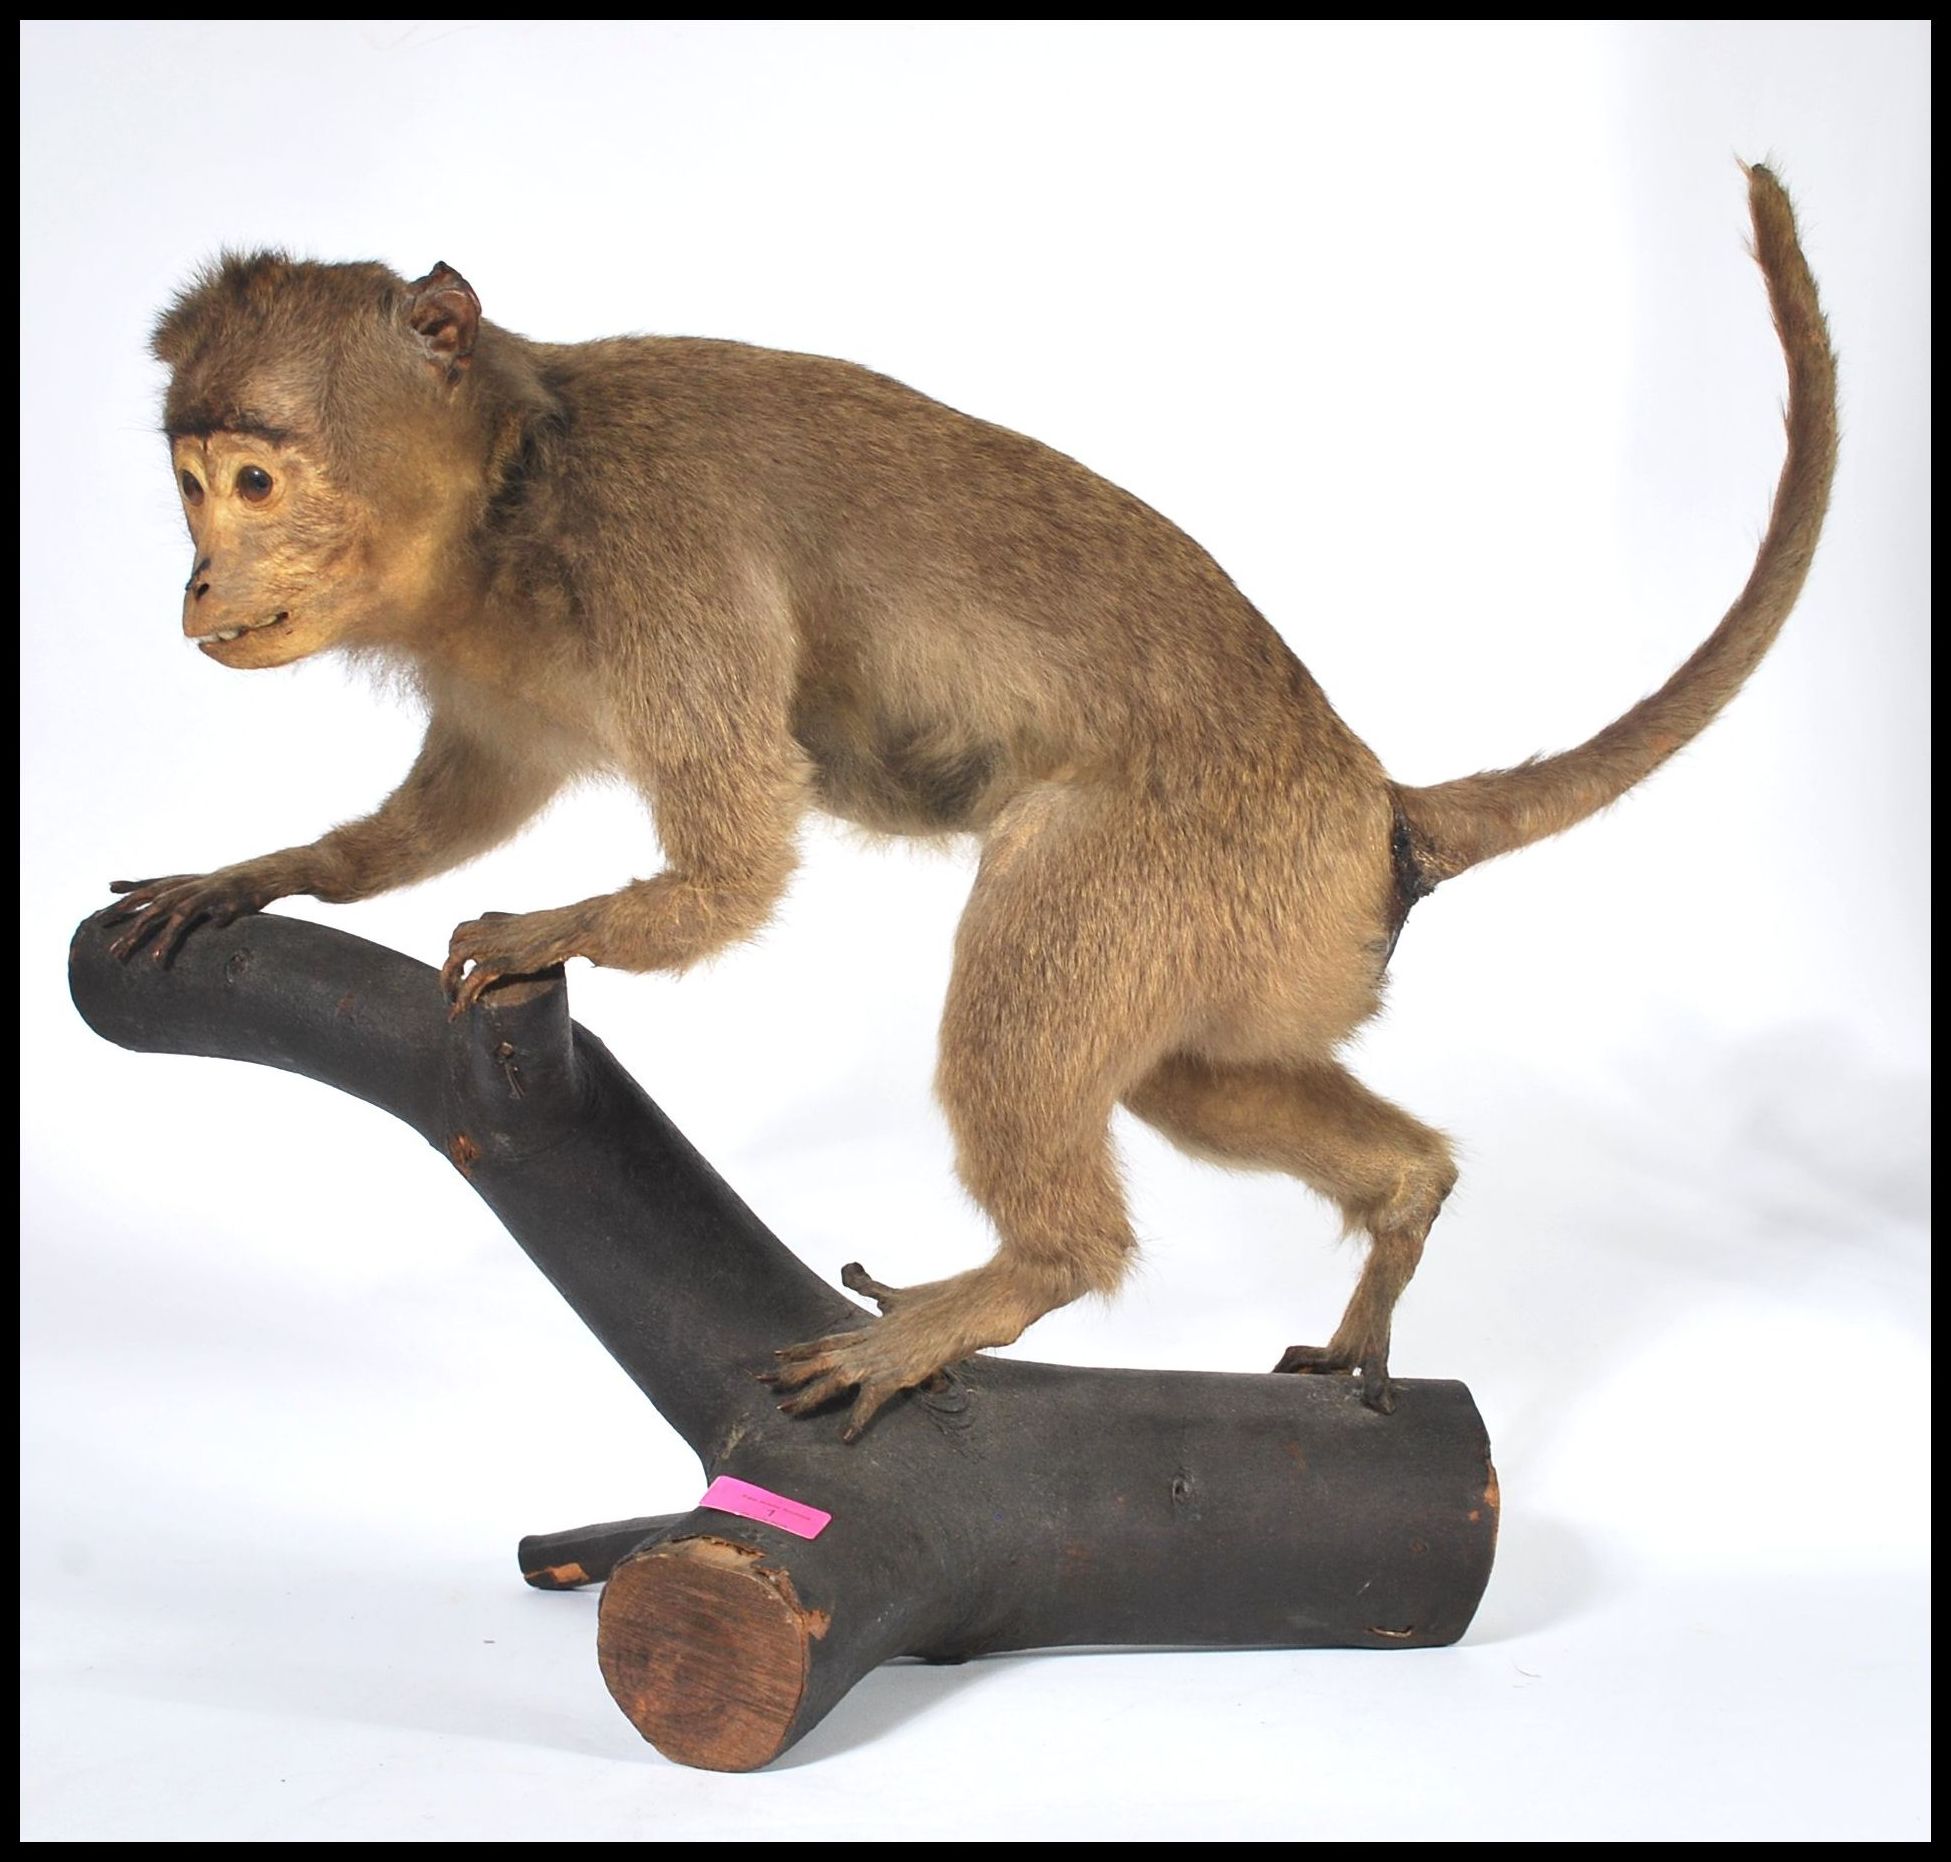 Taxidermy Interest - An early rare taxidermy example of a South American Capuchin monkey being